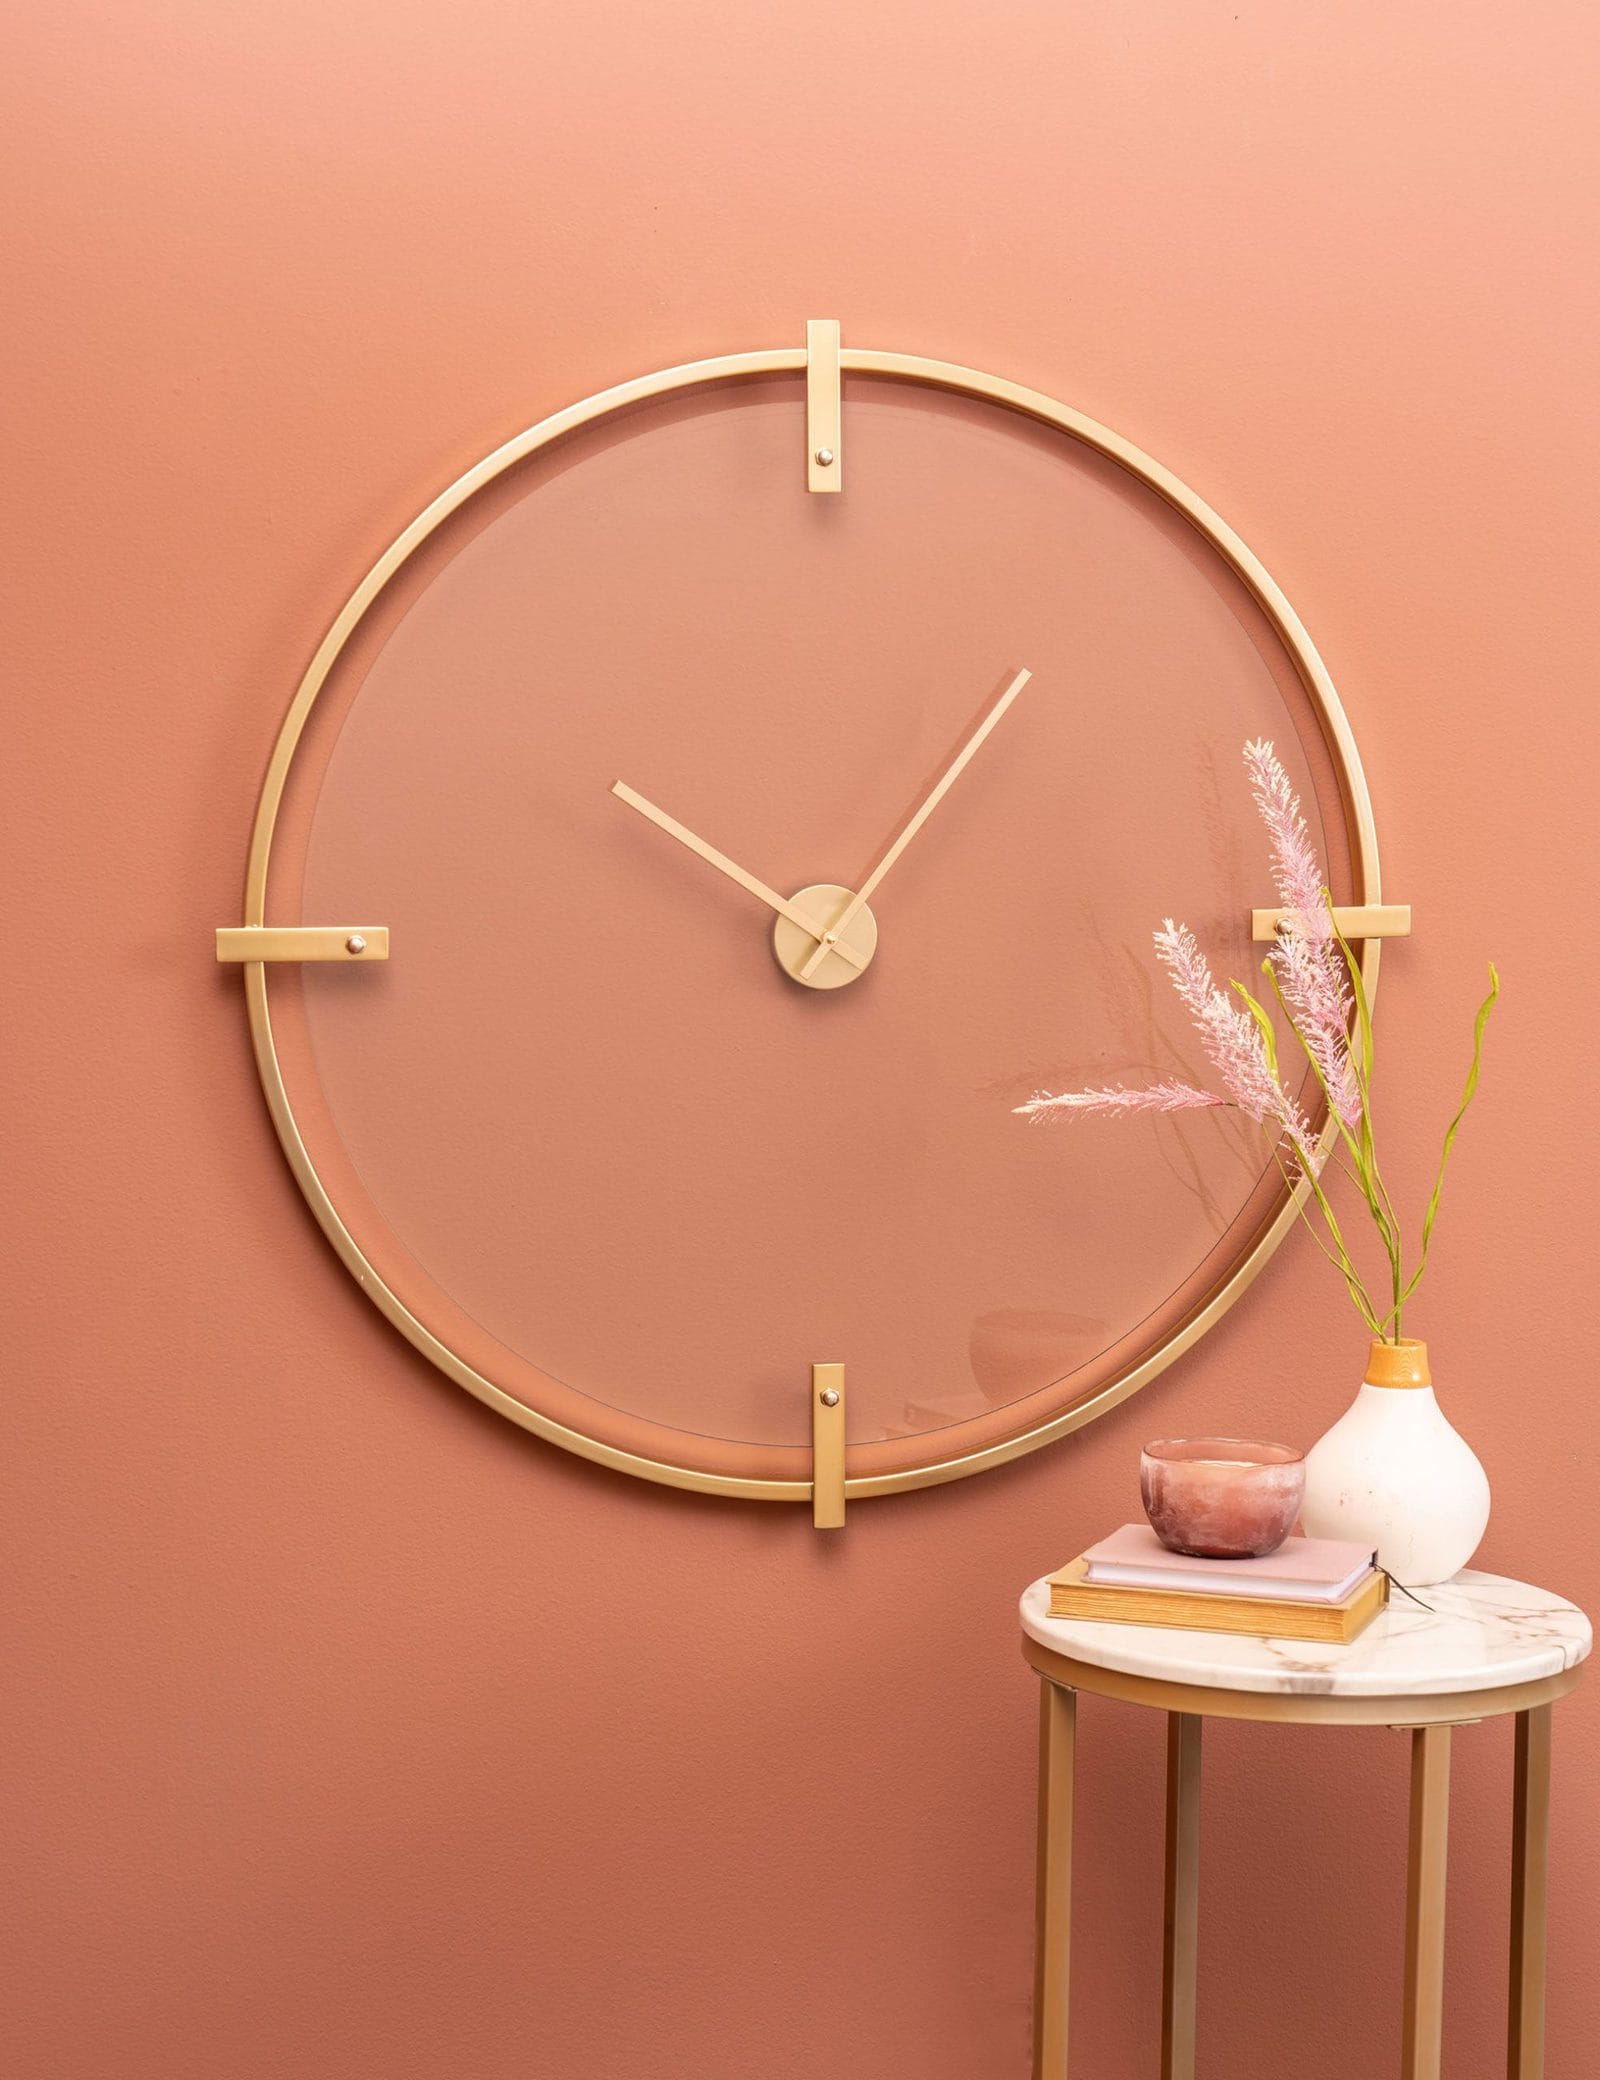 Fill in Space with a 3 Foot Wall Clock